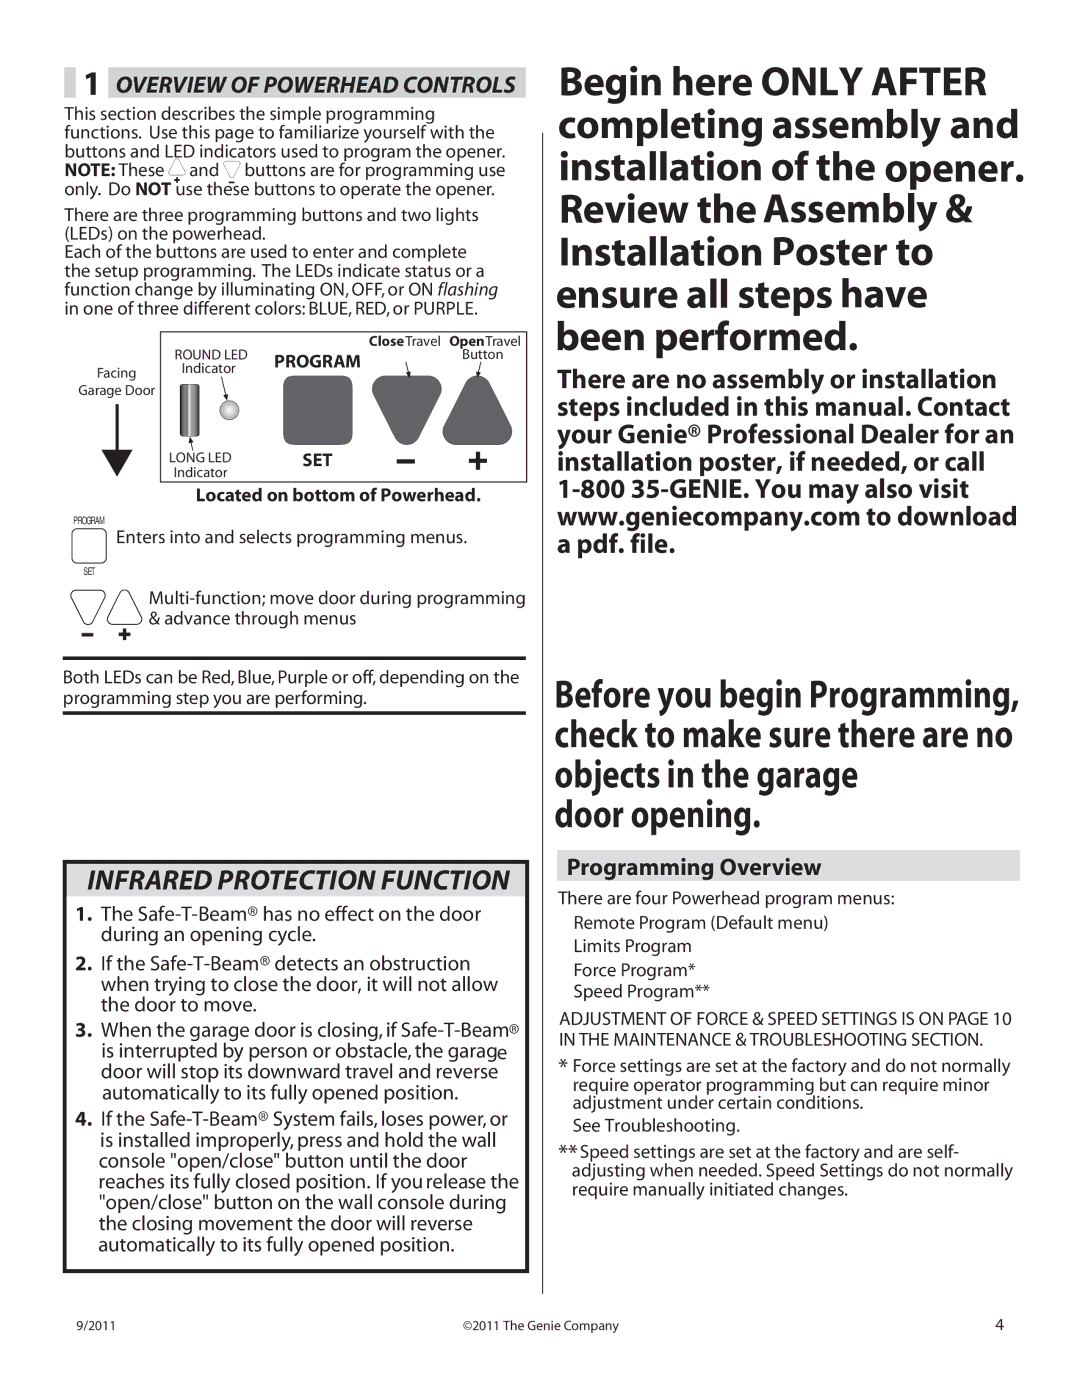 Genie 1000 manual Programming Overview, Enters into and selects programming menus 